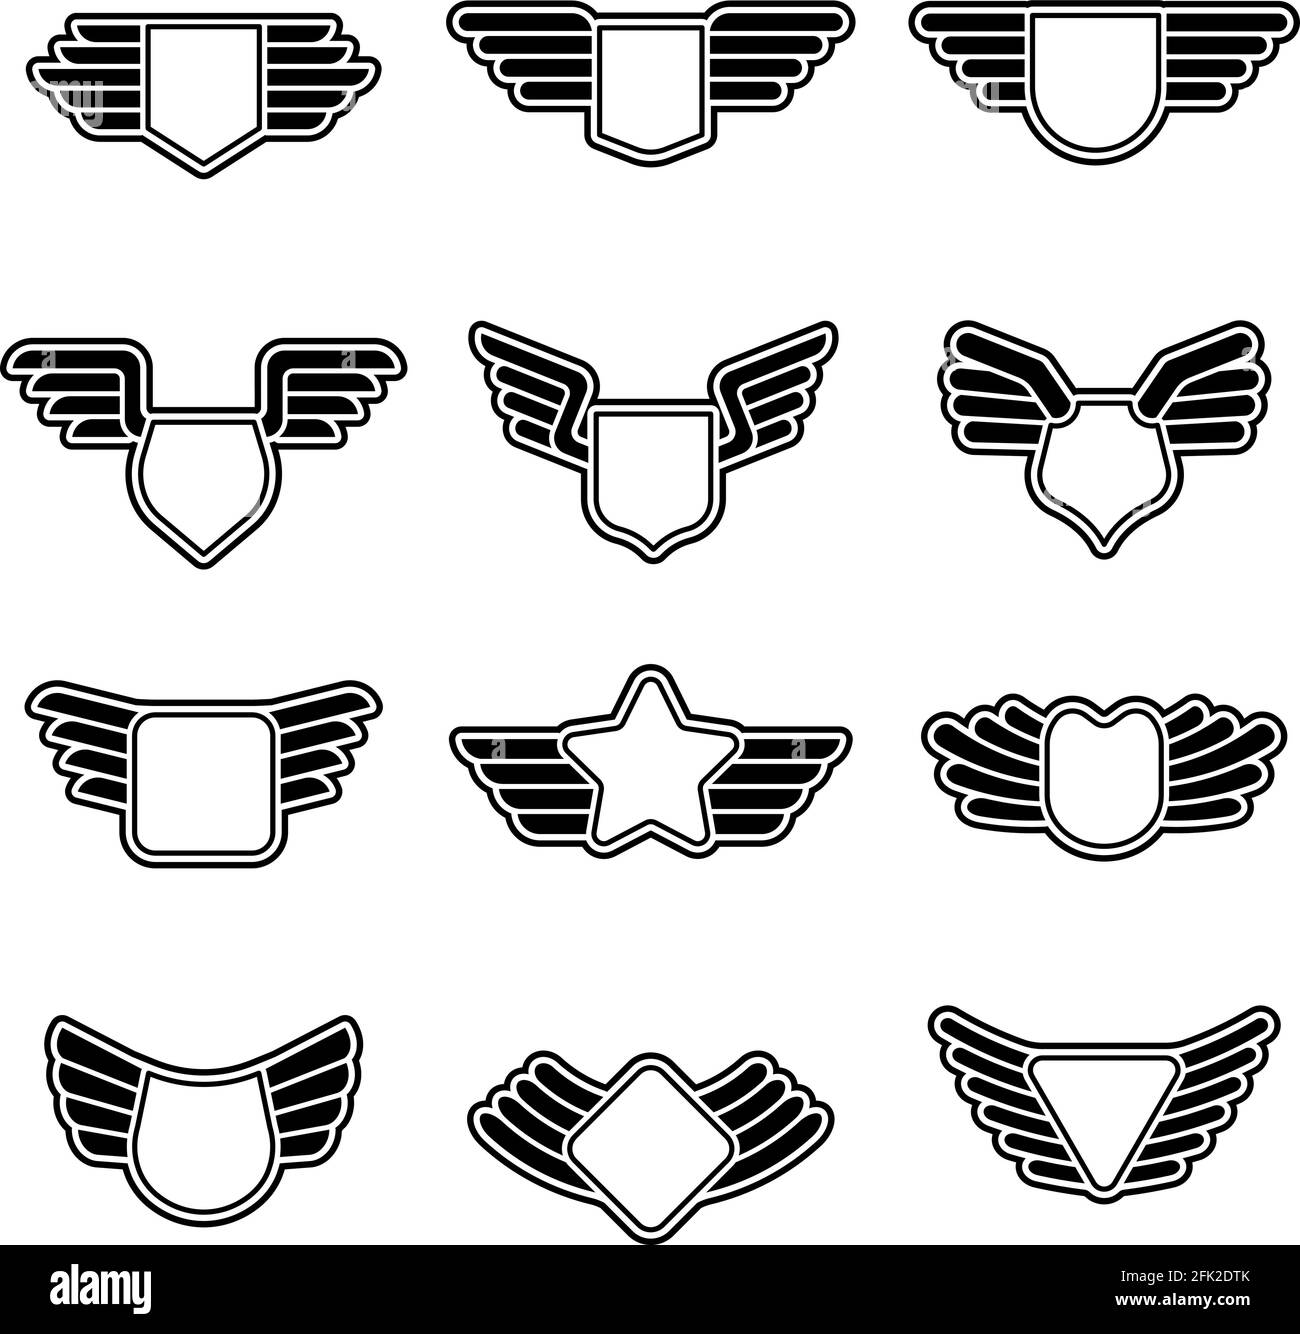 Wings badges. Stylized geometrical army shields empty aviation emblems with symbols of wings vector corporate insignia Stock Vector